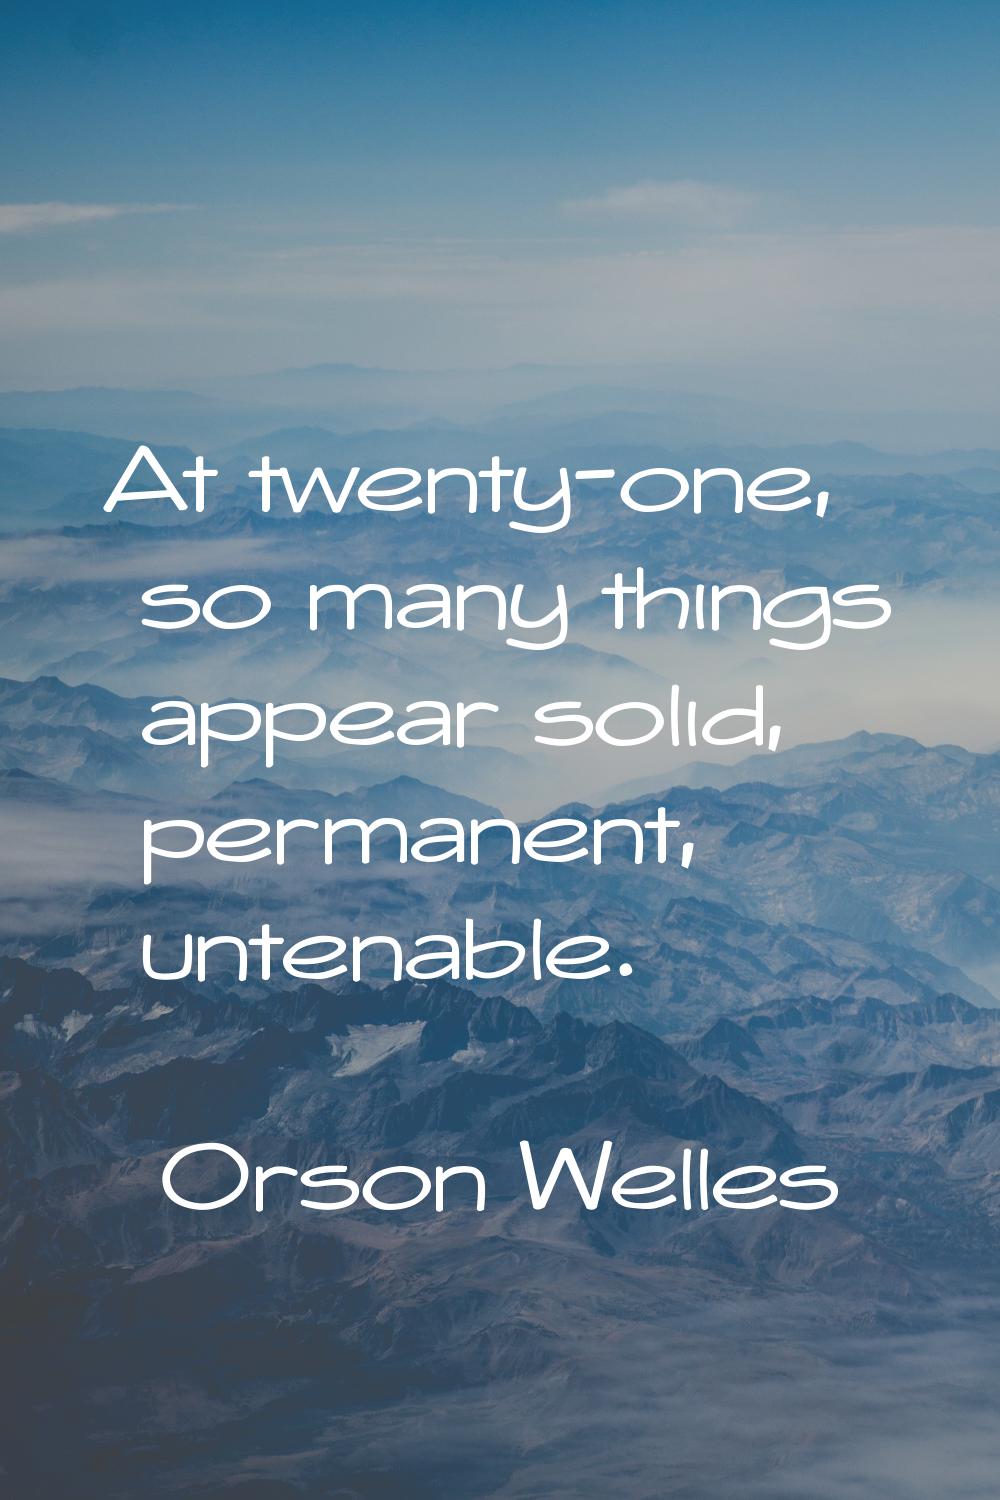 At twenty-one, so many things appear solid, permanent, untenable.